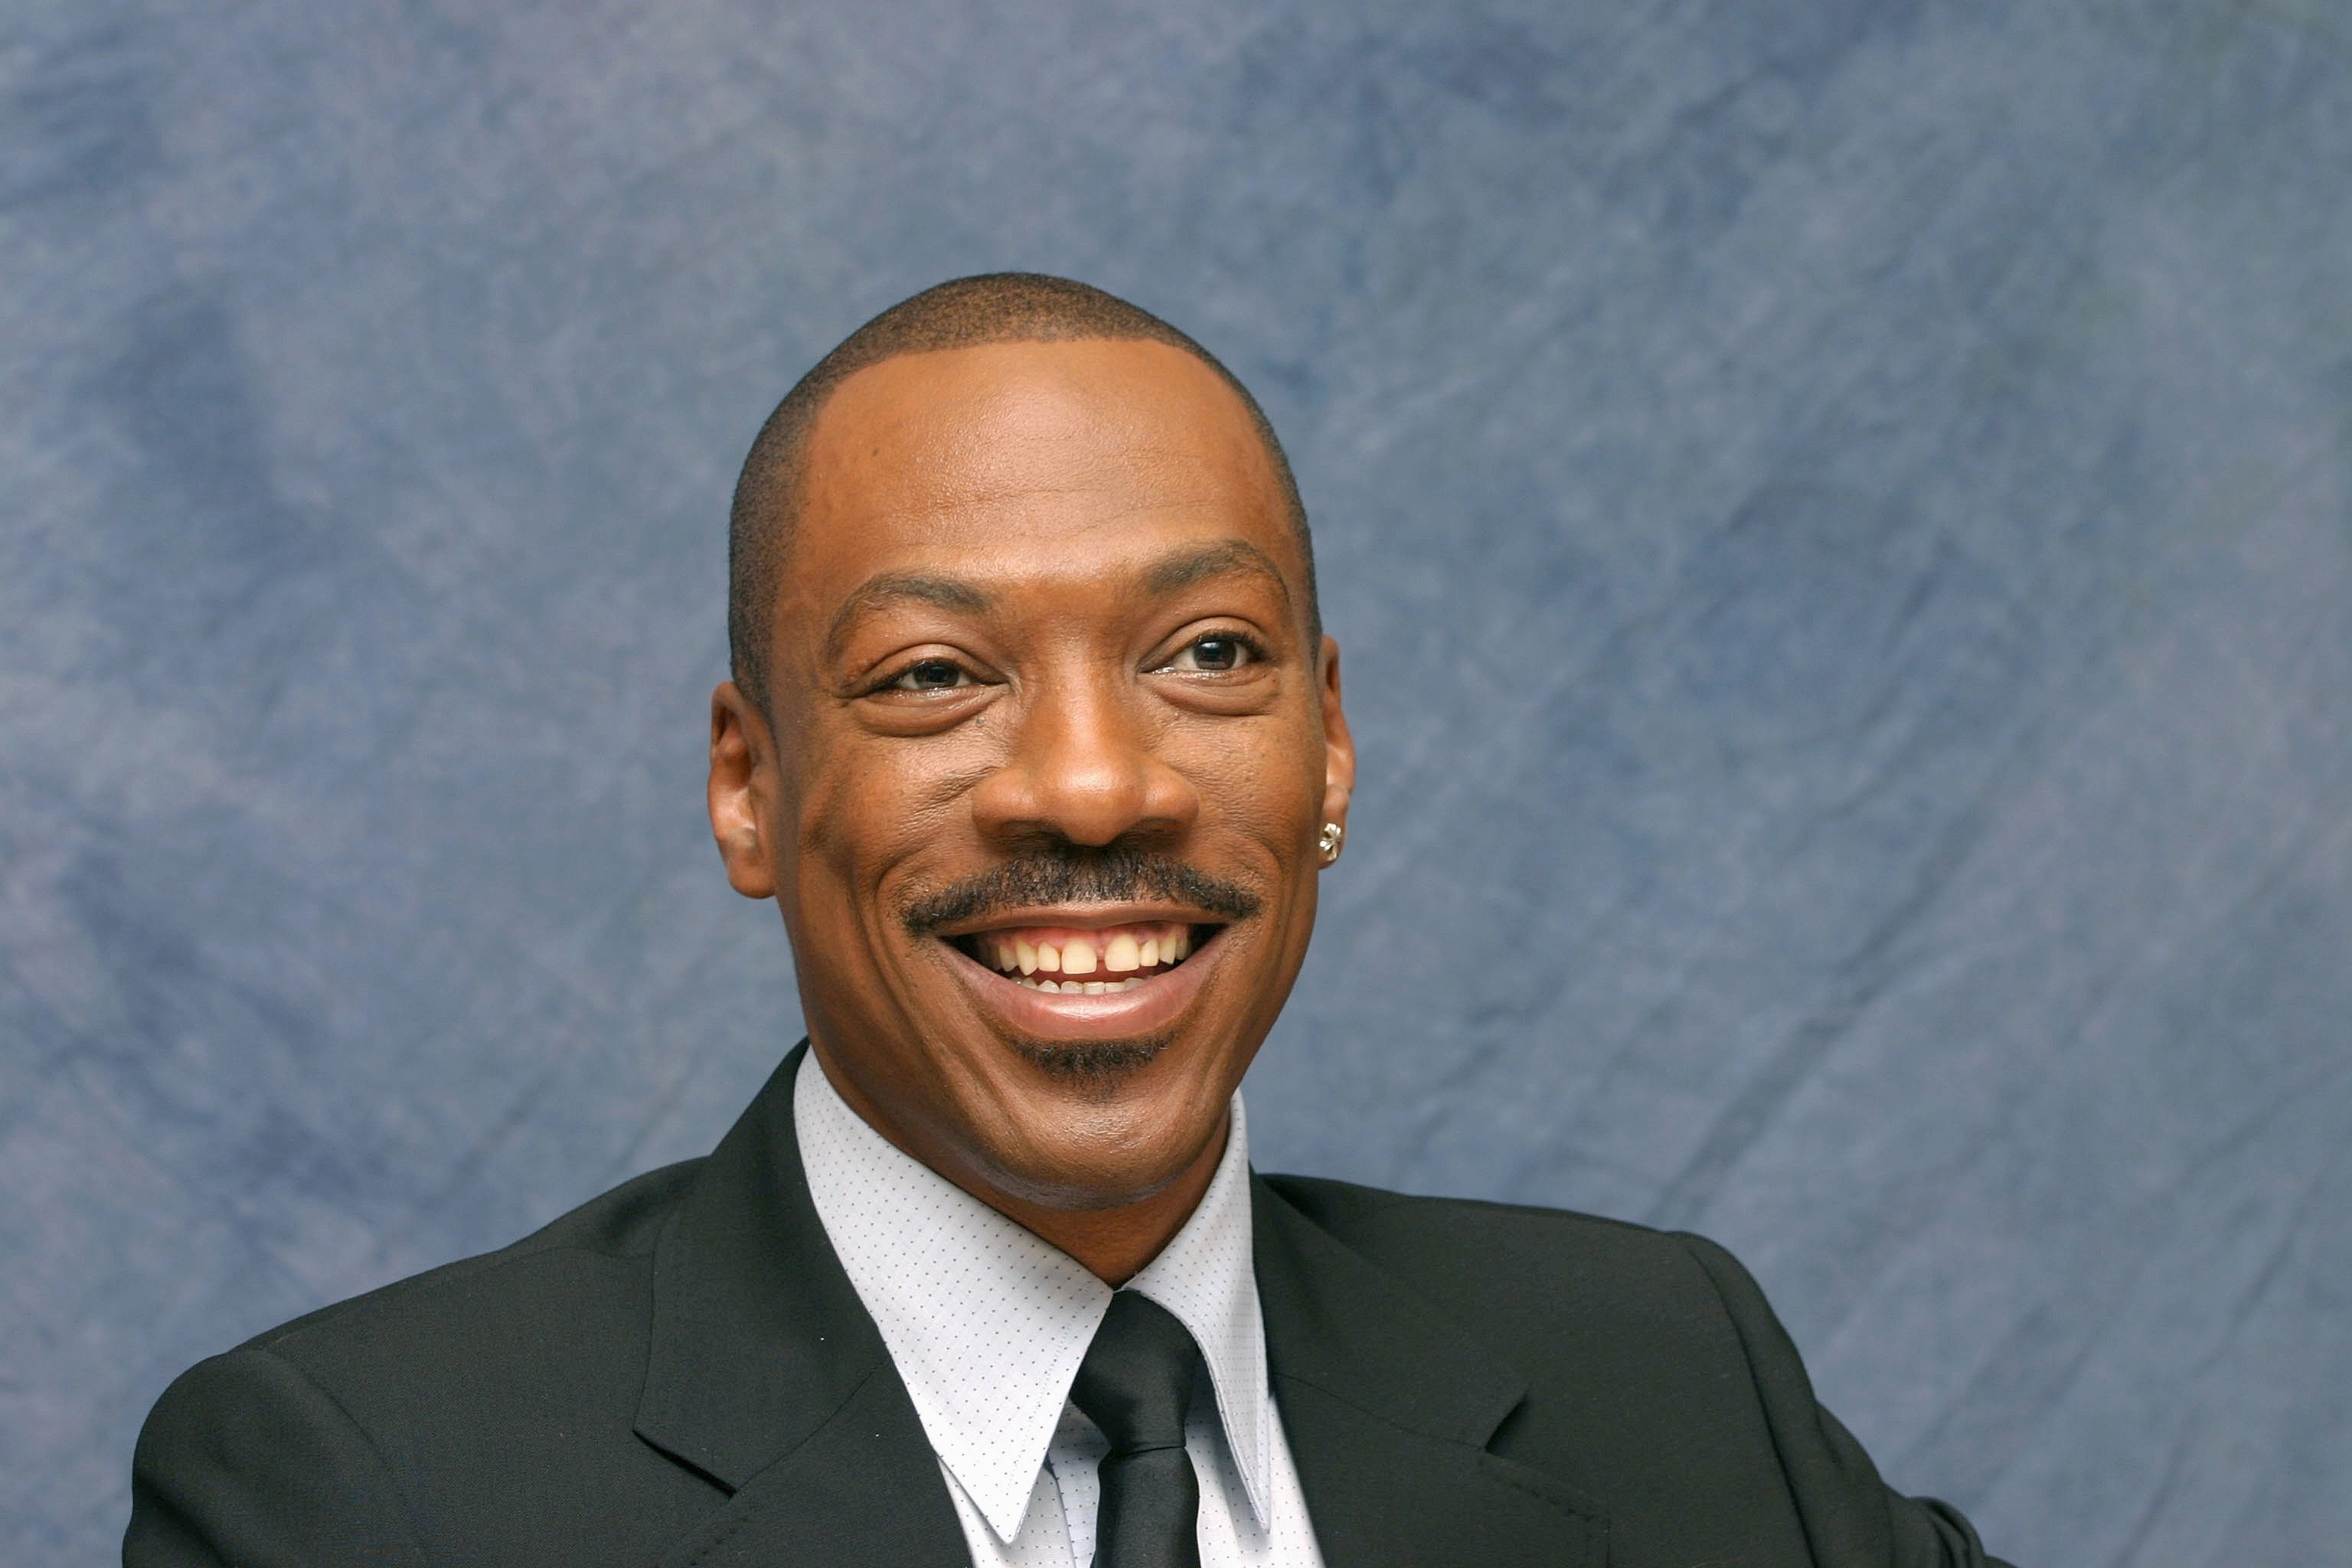 Eddie Murphy speaks with the media at the Beverly Hilton Hotel on November 17, 2006, in Beverly Hills, California. | Source: Getty Images.